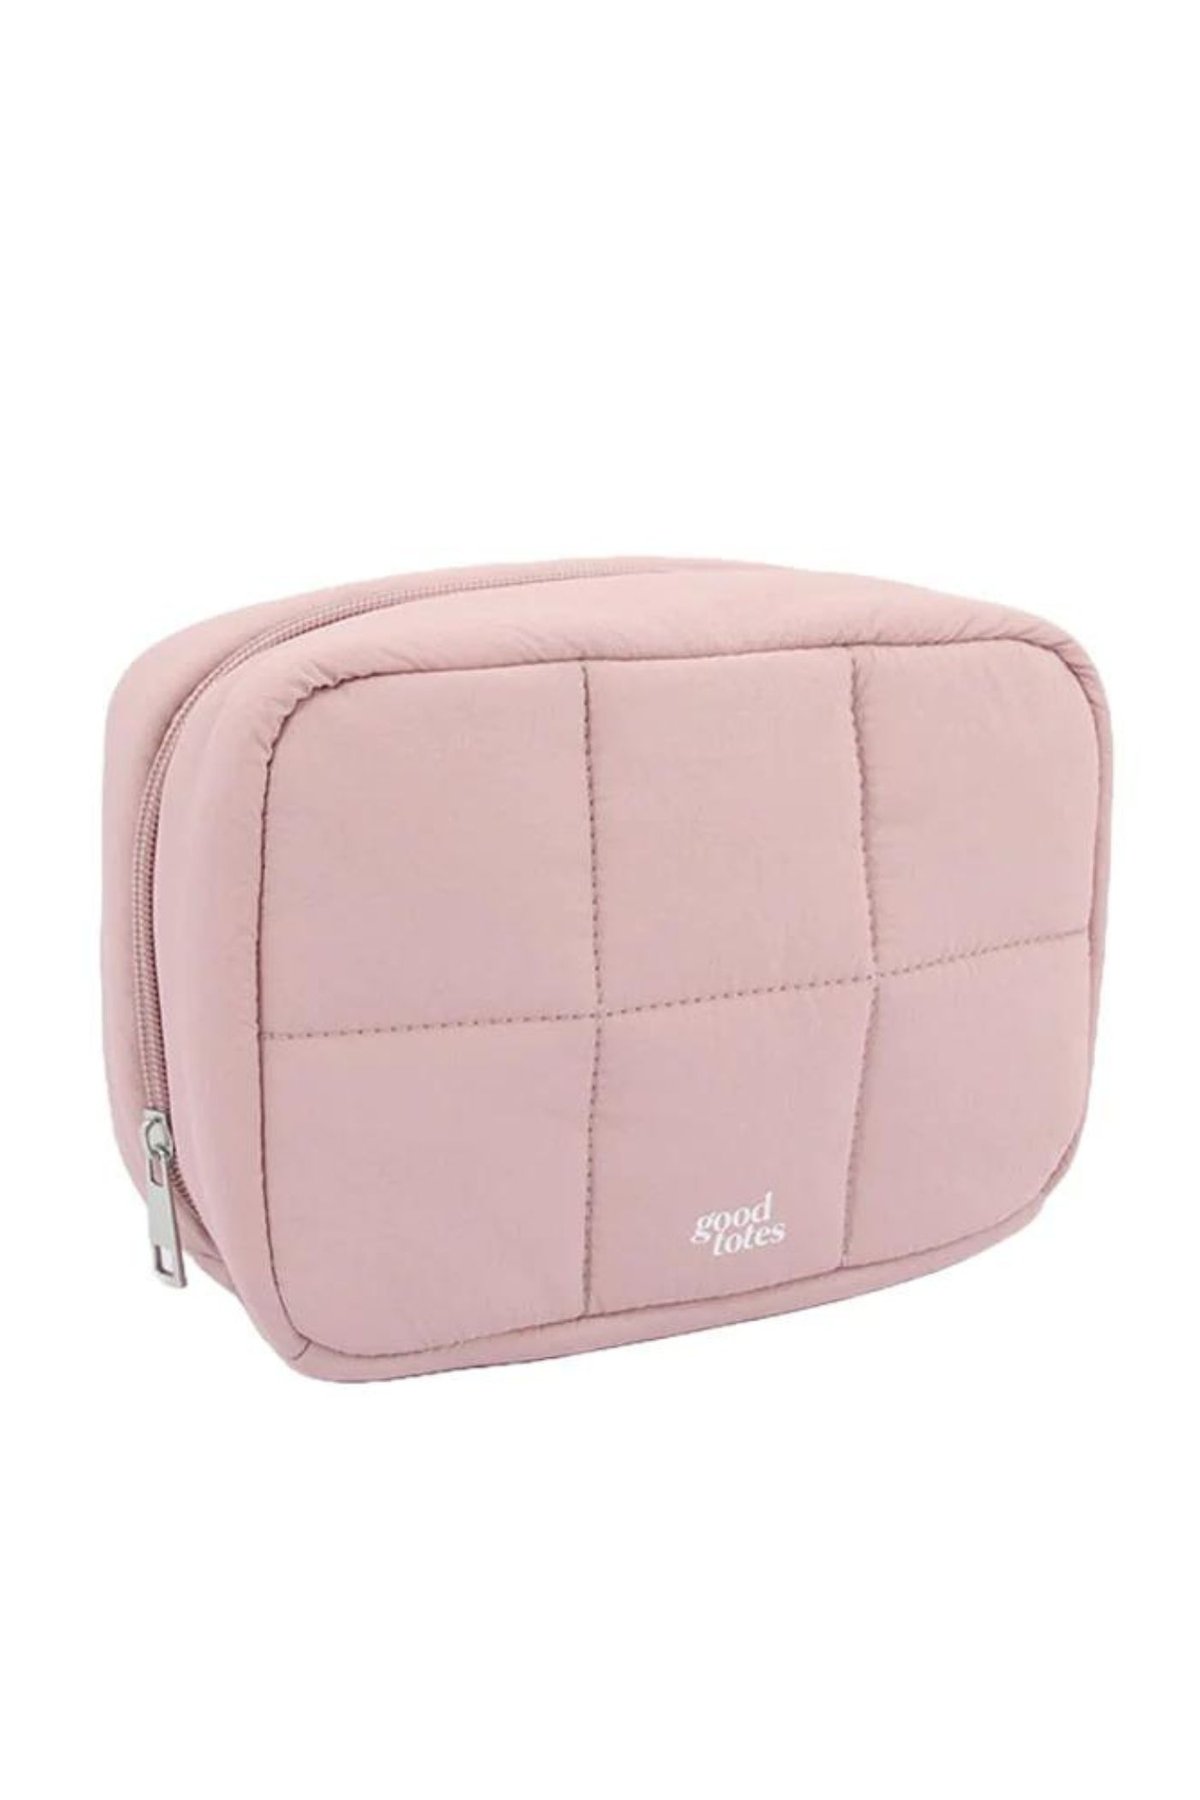 Good Totes (Jumbo Bread Puffer Pouch - Strawberry)